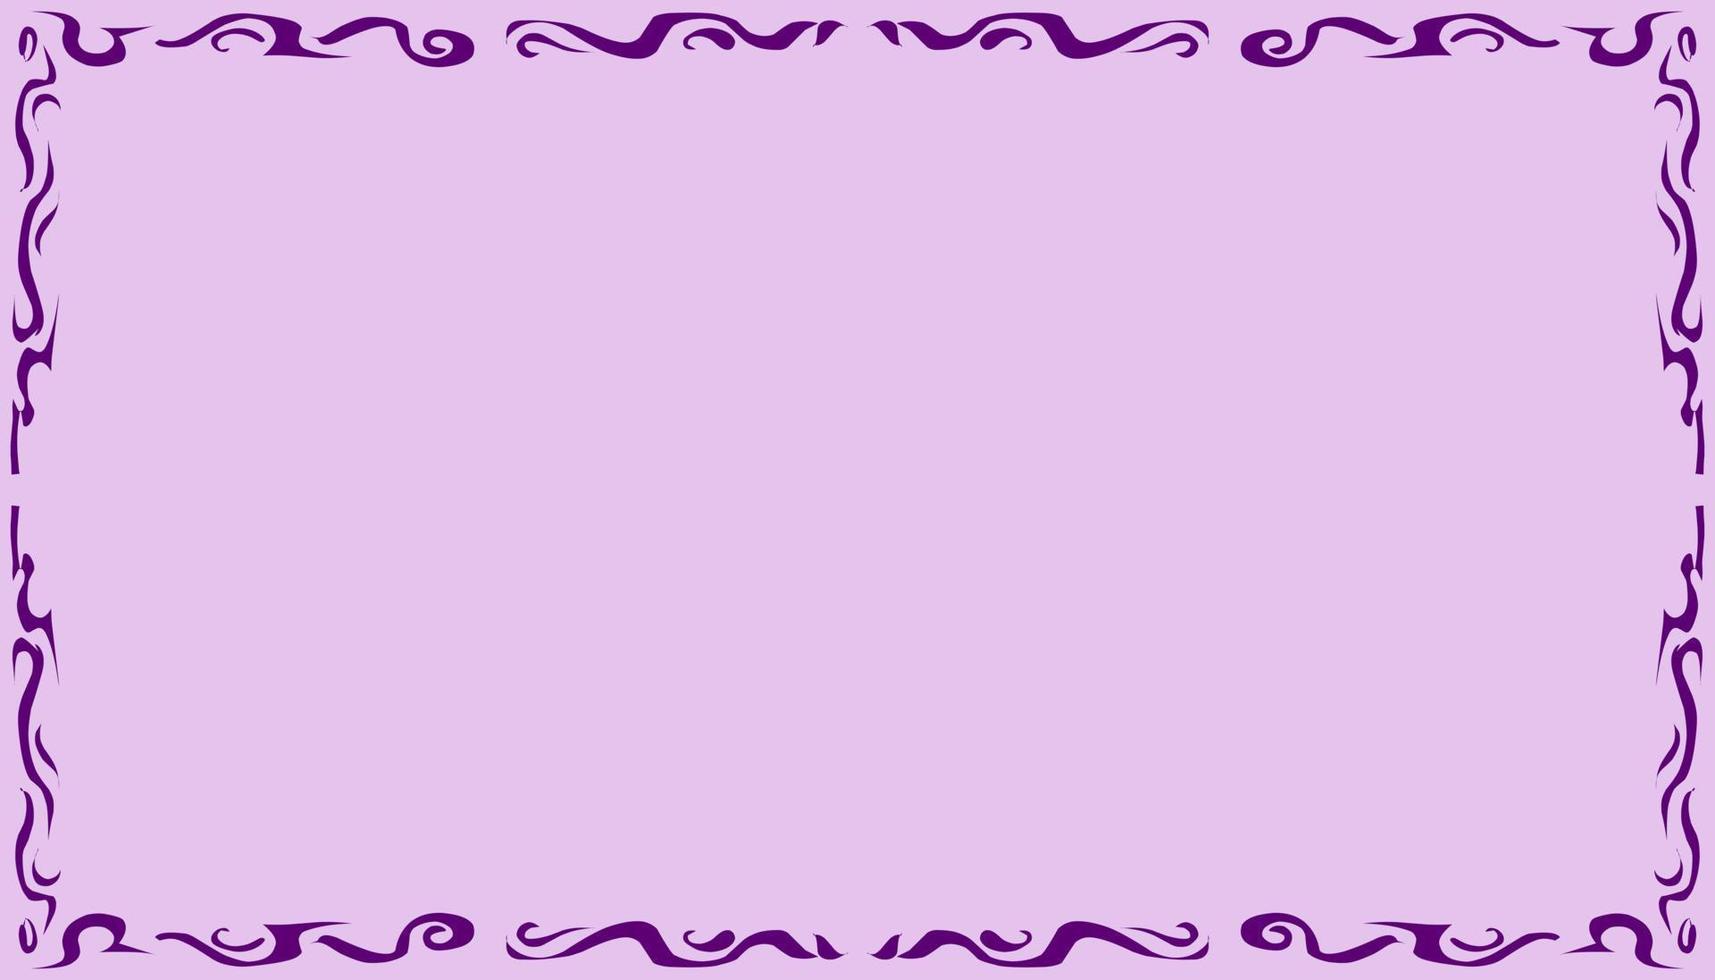 Purple abstract frame border texture illustration background vector